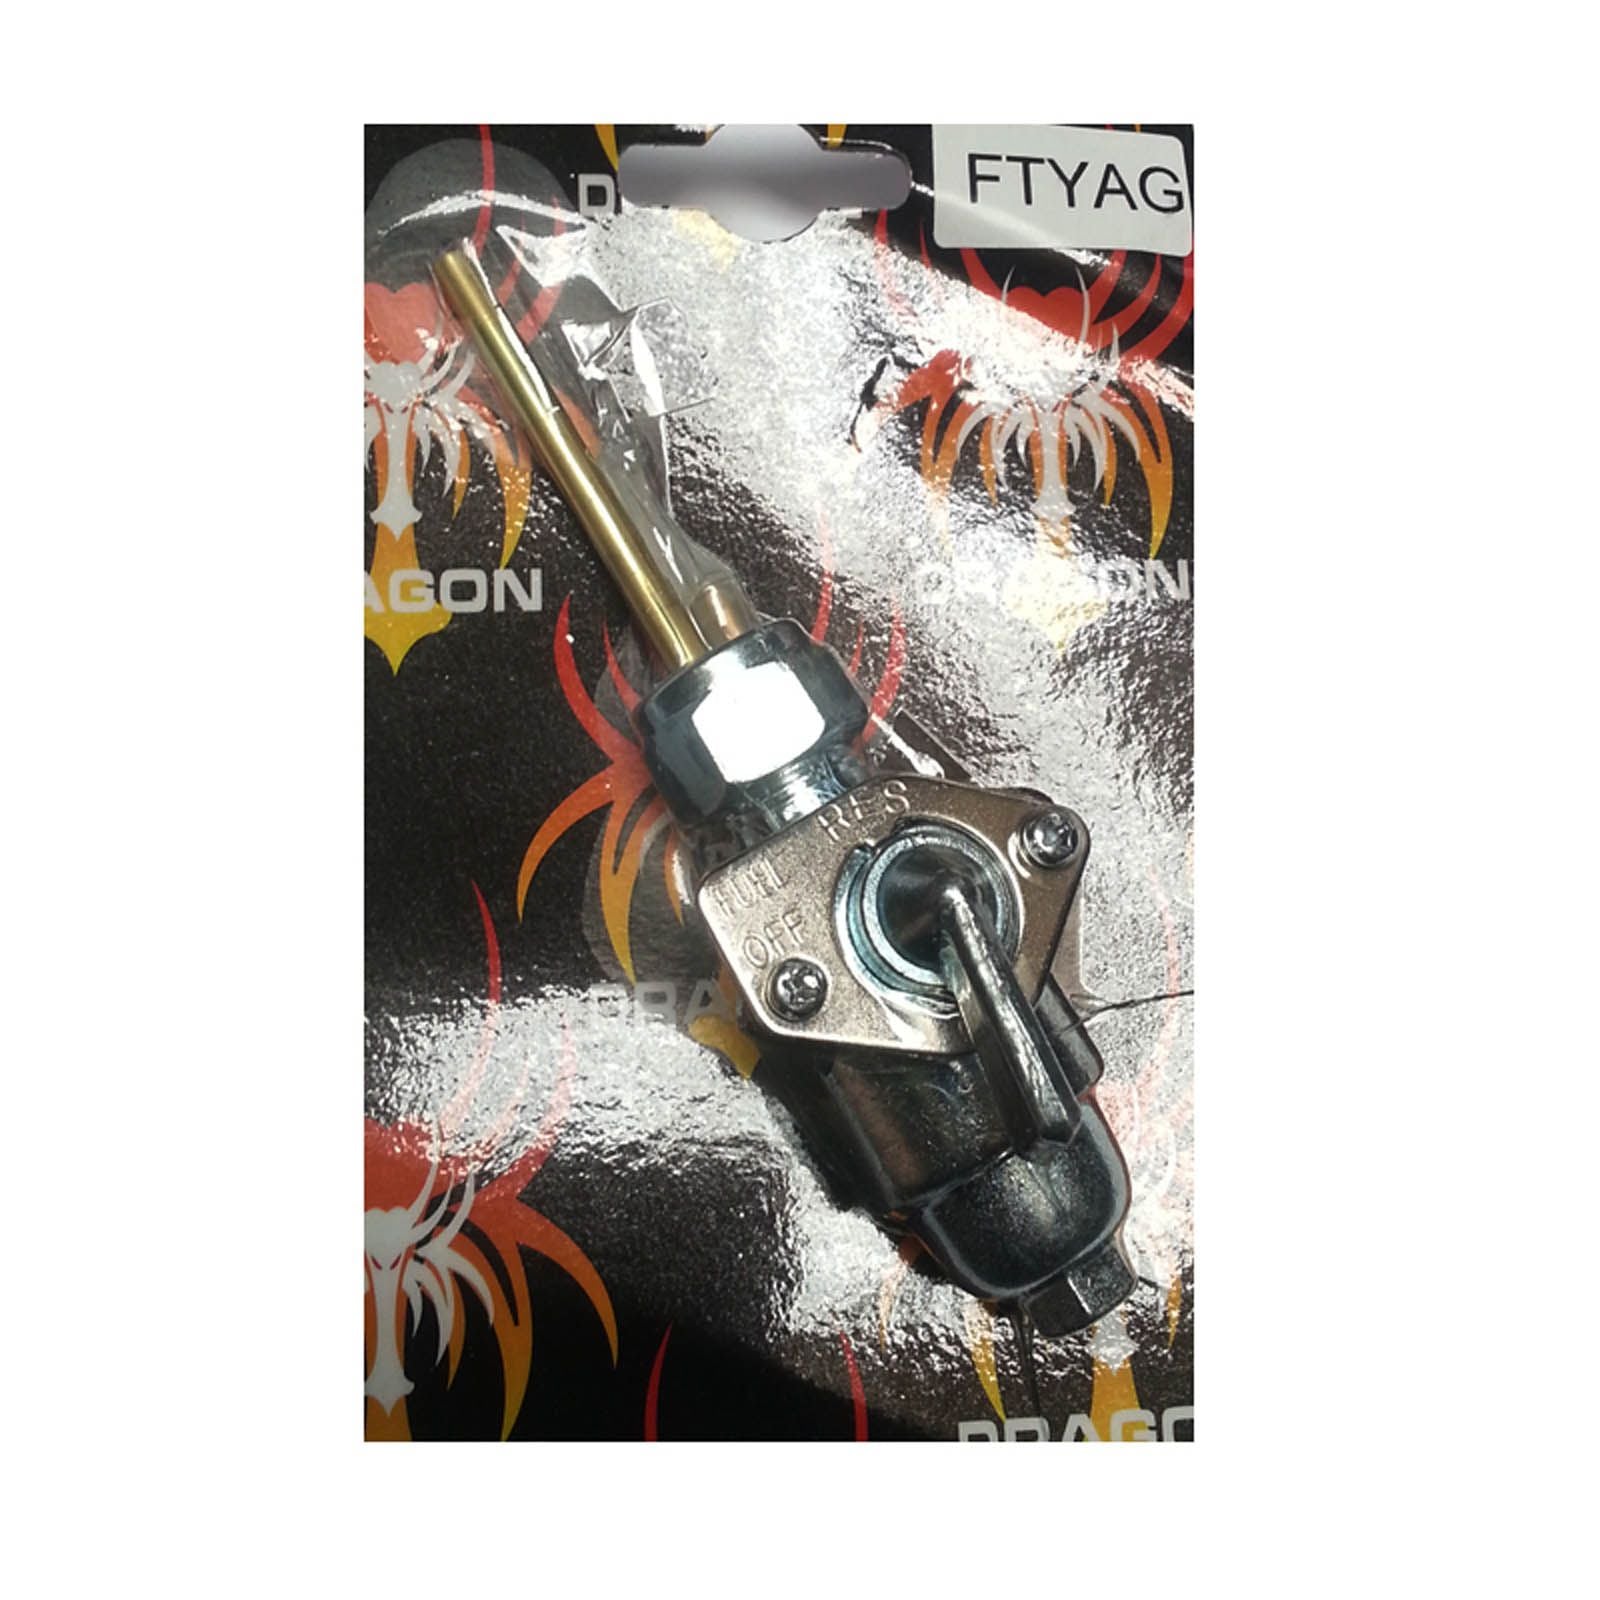 New WHITES Fuel Tap For Yamaha AG100 #FTYAG